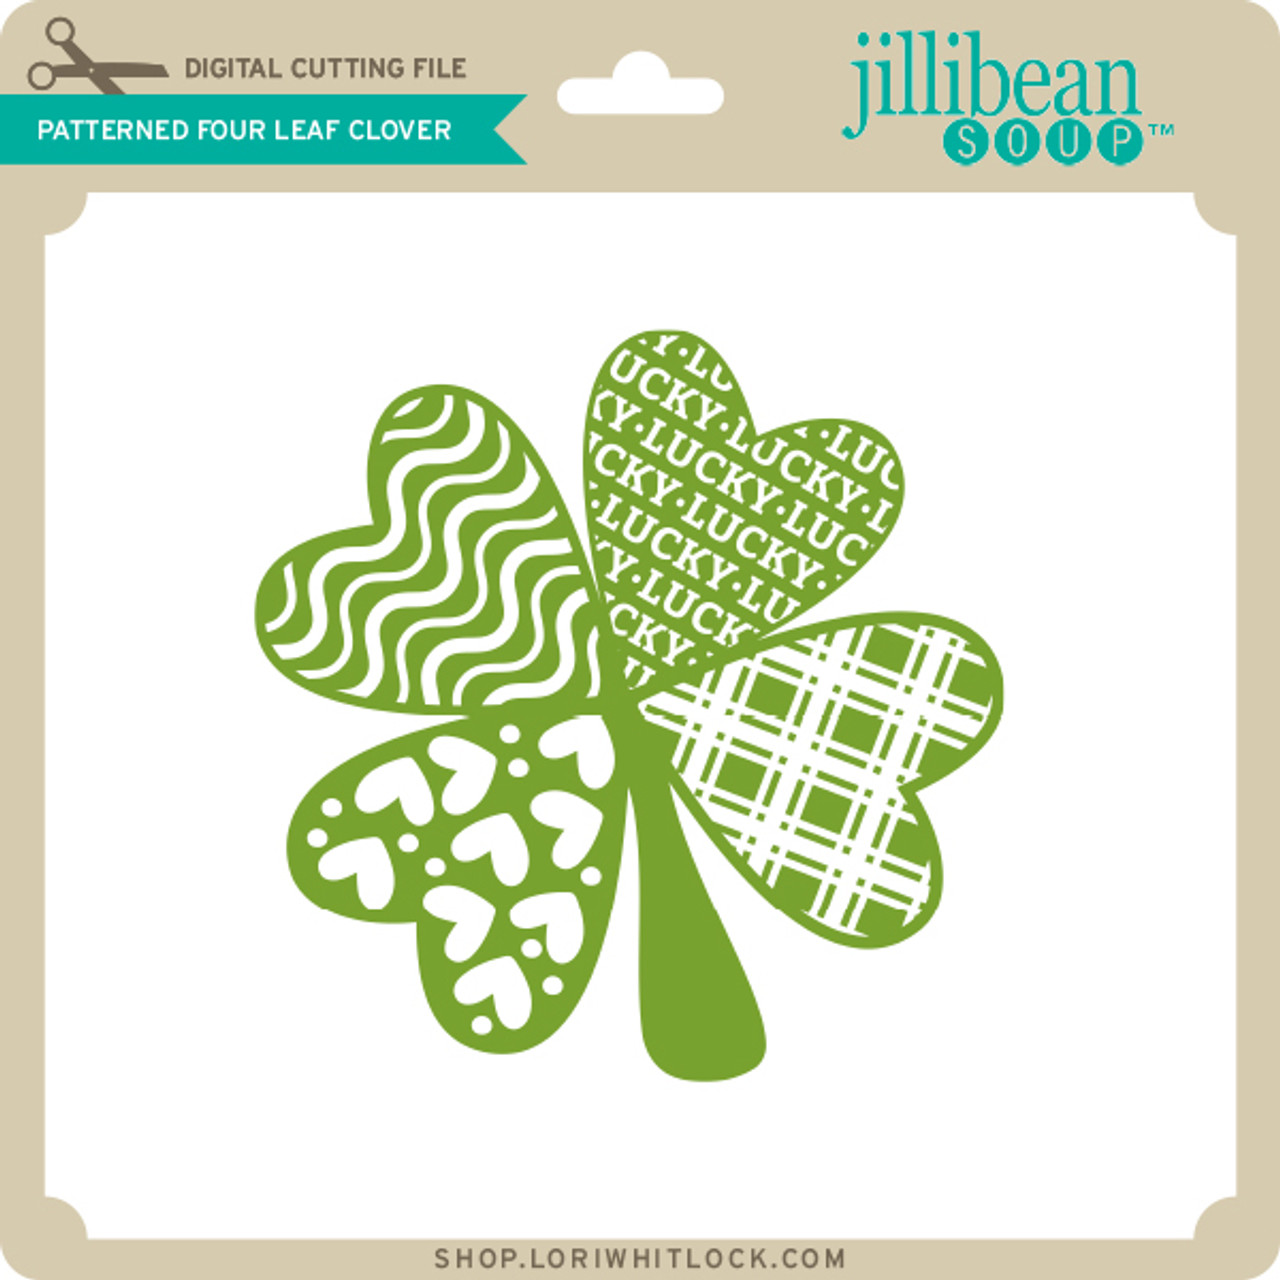 https://cdn11.bigcommerce.com/s-zlf3iiy2/images/stencil/1280x1280/products/21844/24011/JB-Patterned-Four-Leaf-Clover__15469.1646694336.jpg?c=2